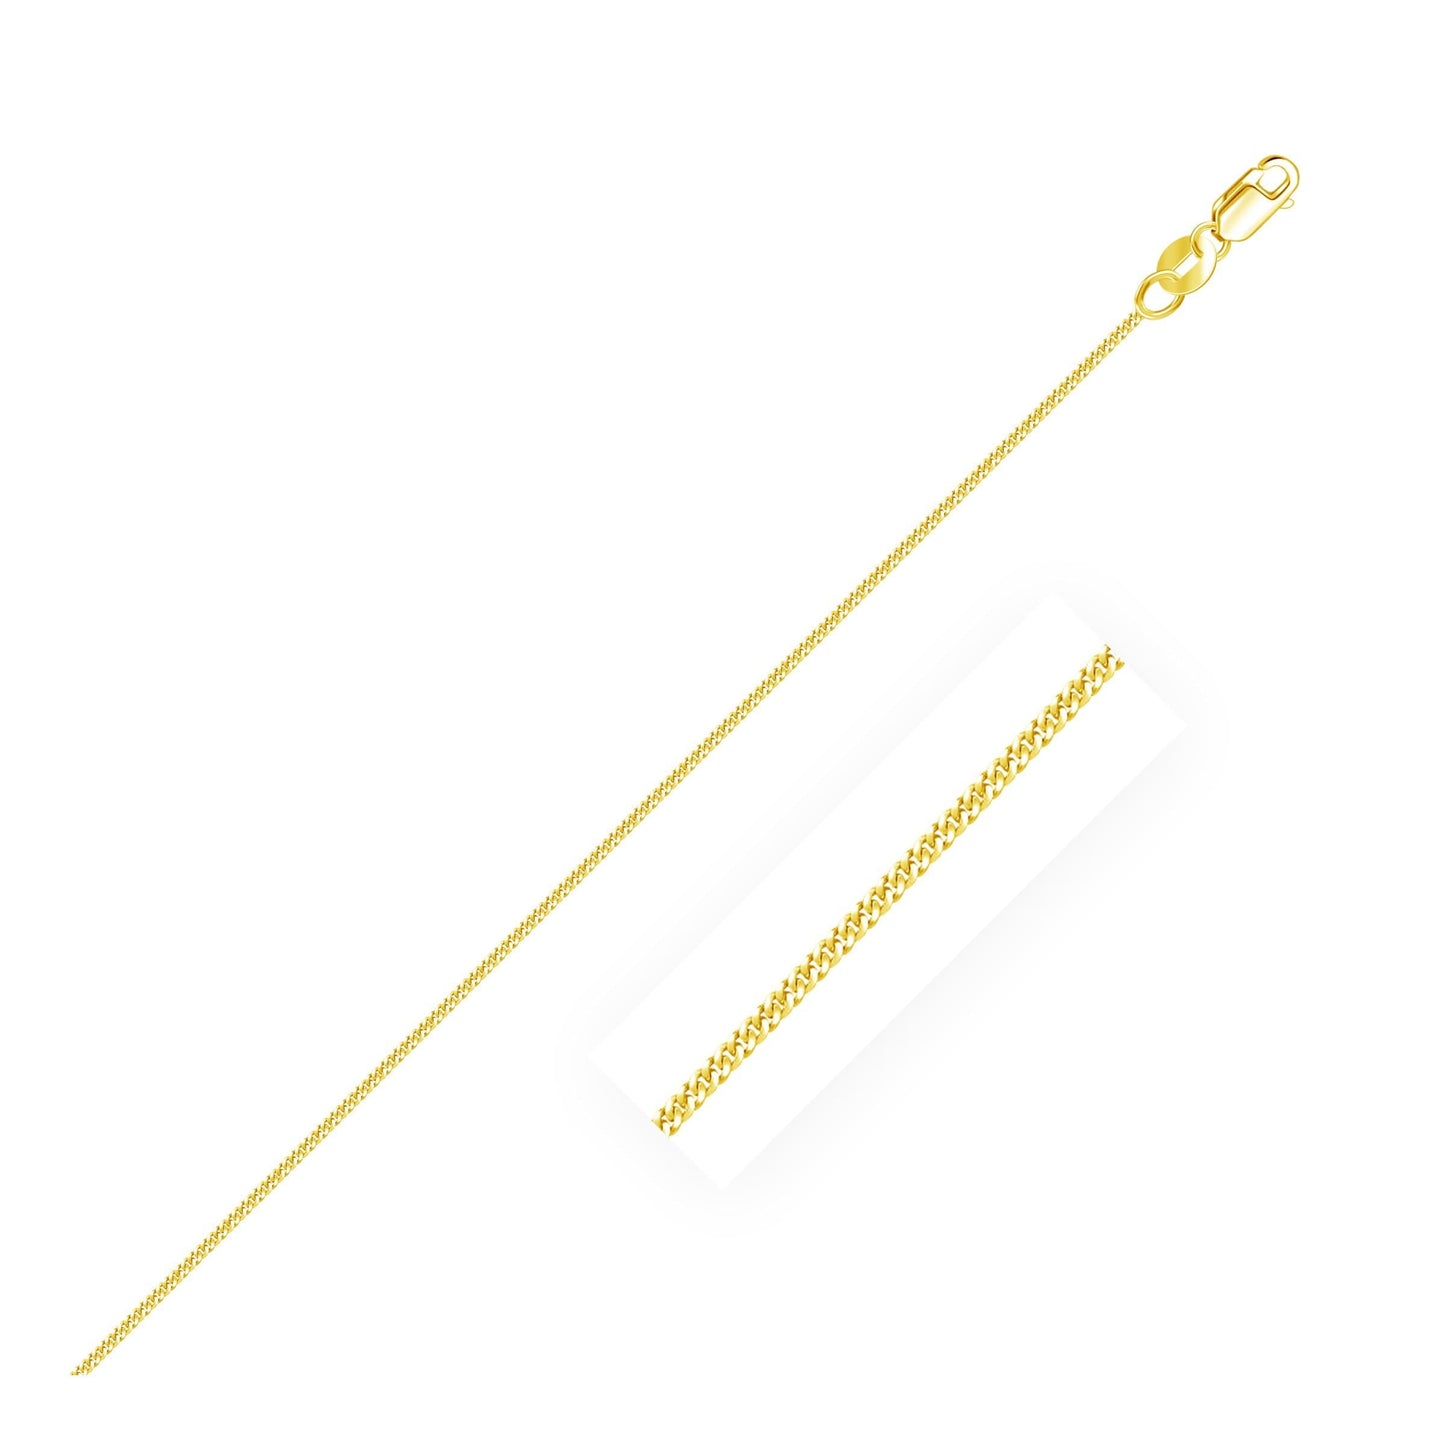 10k Yellow Gold Gourmette Chain in 1.0 mm